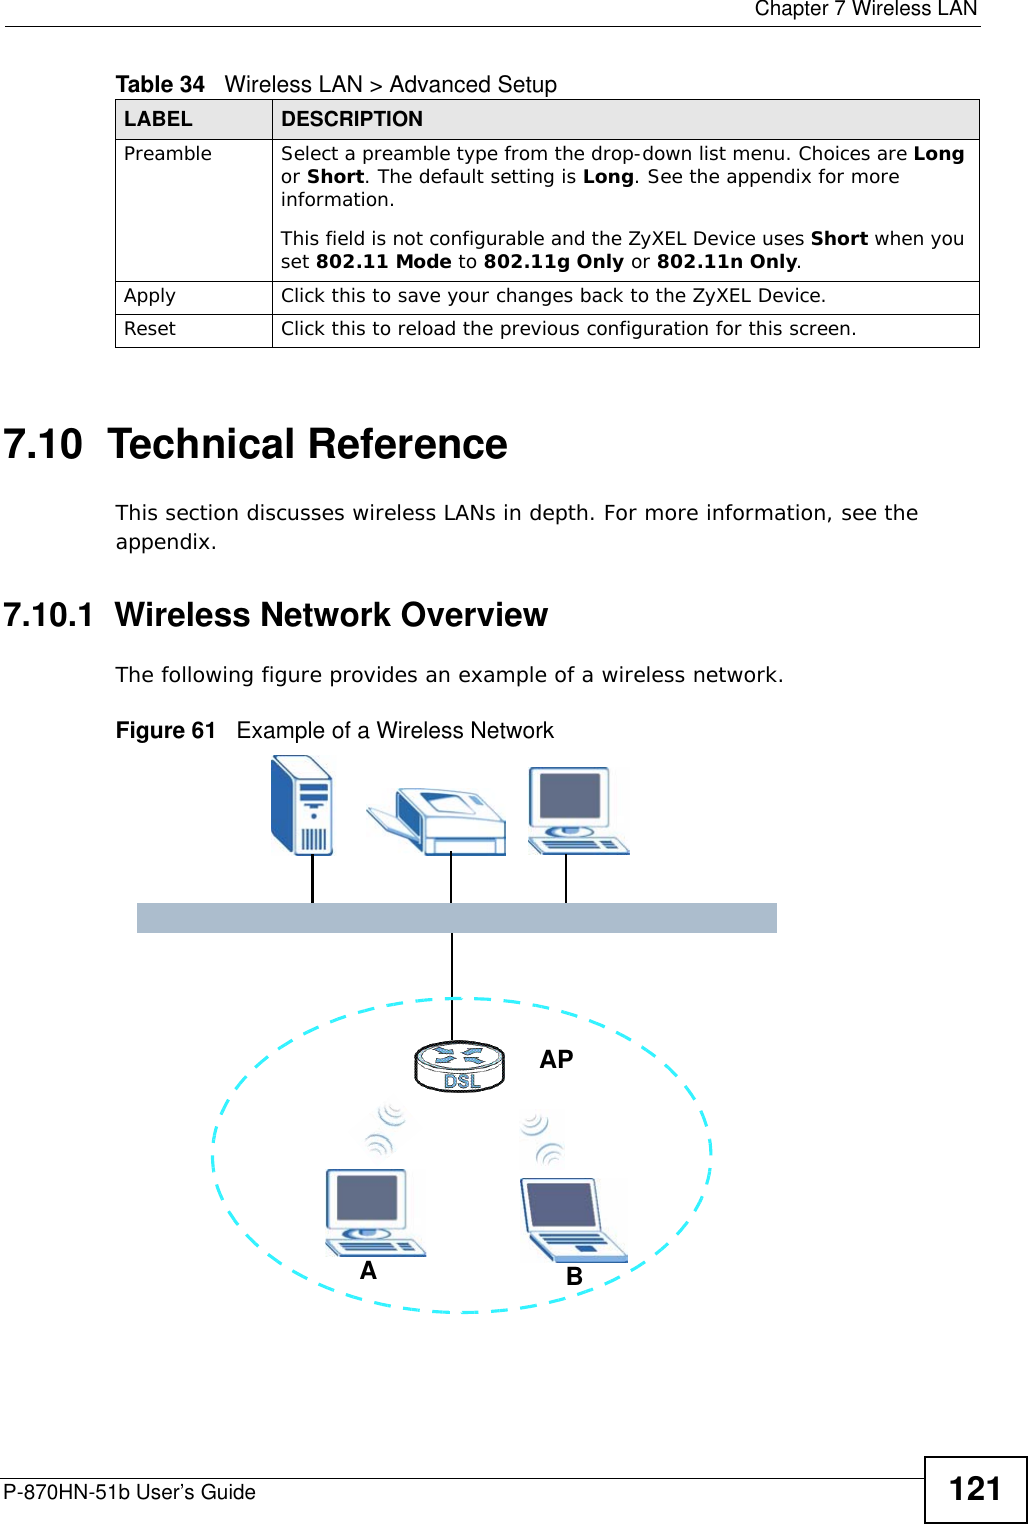  Chapter 7 Wireless LANP-870HN-51b User’s Guide 1217.10  Technical ReferenceThis section discusses wireless LANs in depth. For more information, see the appendix.7.10.1  Wireless Network OverviewThe following figure provides an example of a wireless network.Figure 61   Example of a Wireless NetworkPreamble Select a preamble type from the drop-down list menu. Choices are Long or Short. The default setting is Long. See the appendix for more information.This field is not configurable and the ZyXEL Device uses Short when you set 802.11 Mode to 802.11g Only or 802.11n Only.Apply Click this to save your changes back to the ZyXEL Device.Reset Click this to reload the previous configuration for this screen.Table 34   Wireless LAN &gt; Advanced SetupLABEL DESCRIPTIONABAP